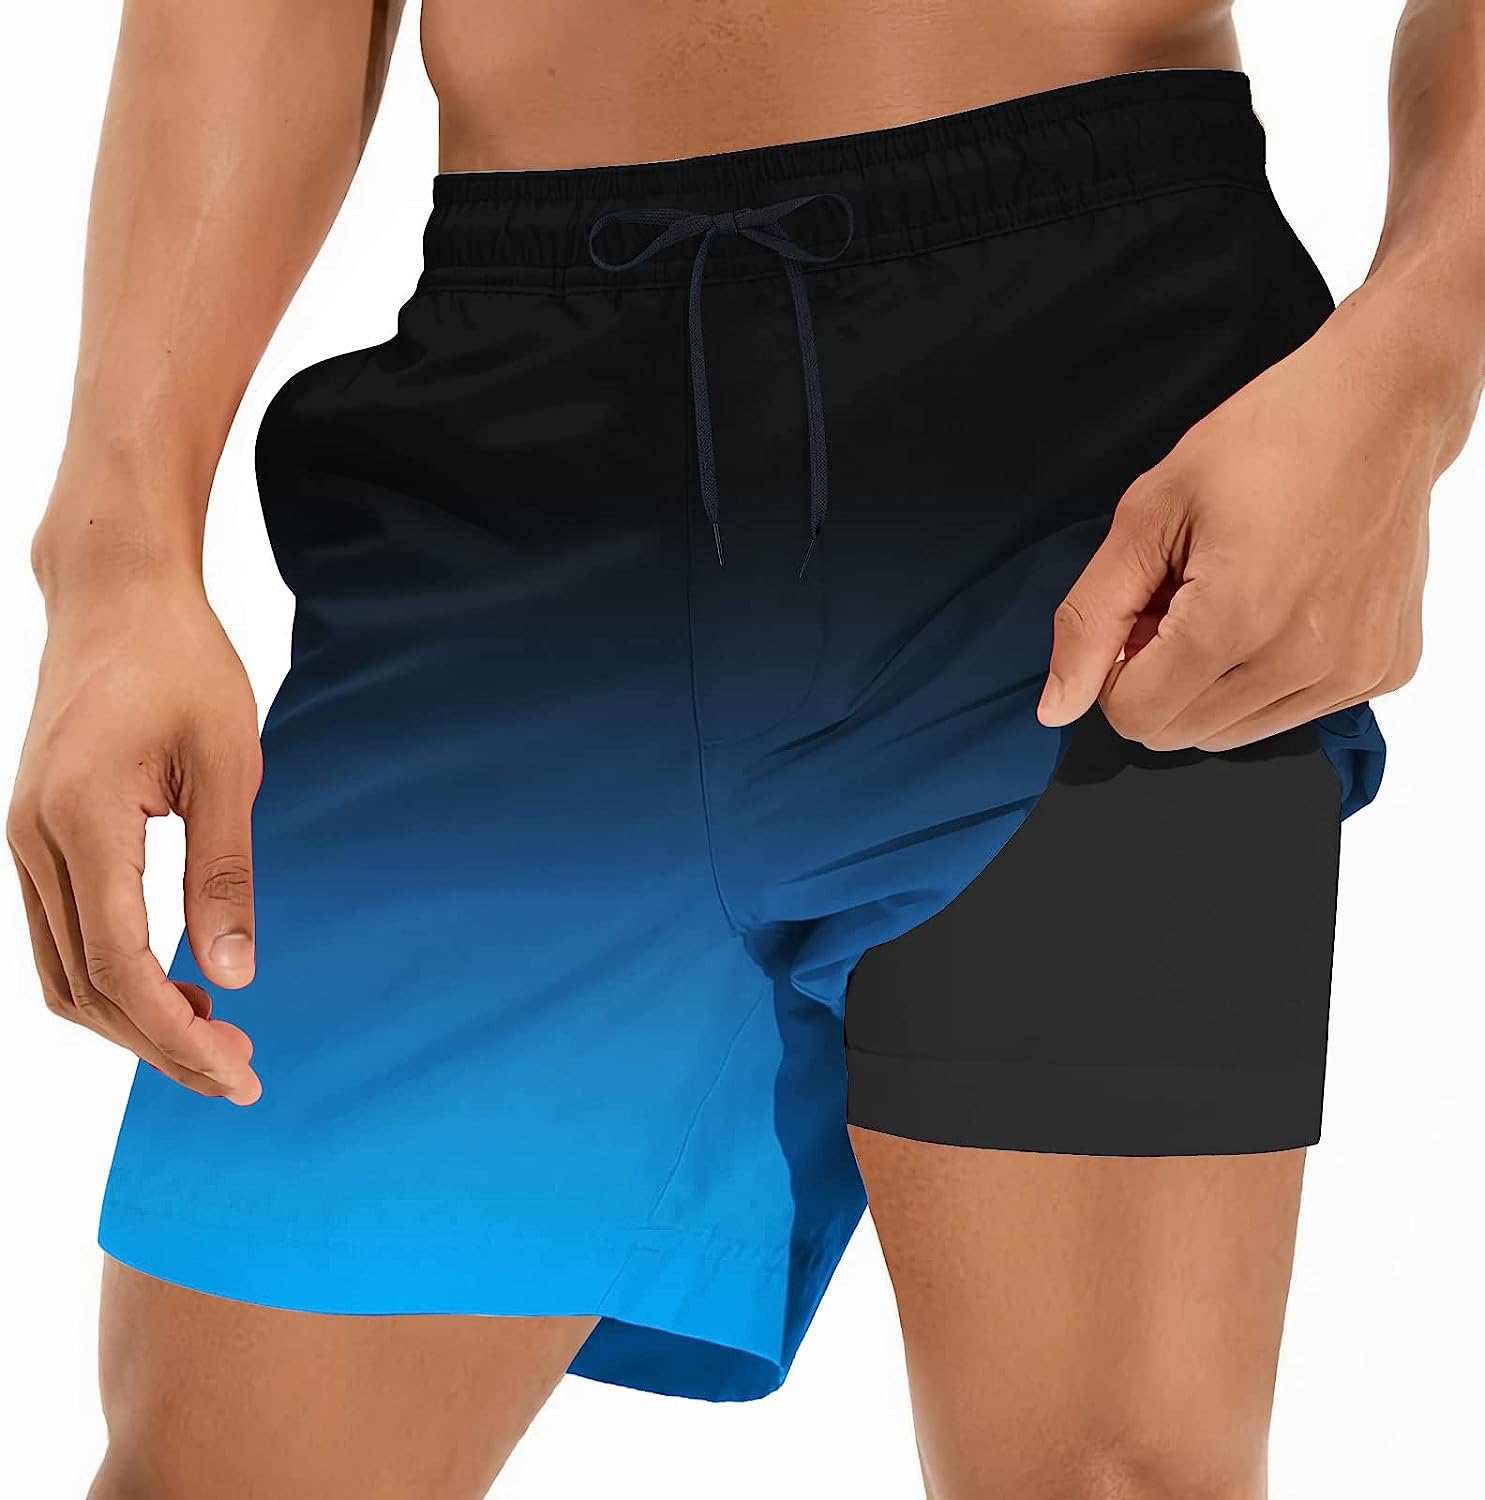 Cozople Mens Swimming Trunks with Compression Liner Swim Shorts 7 inch Quick Dry Bathing Suit Anti Chafe Boardshorts